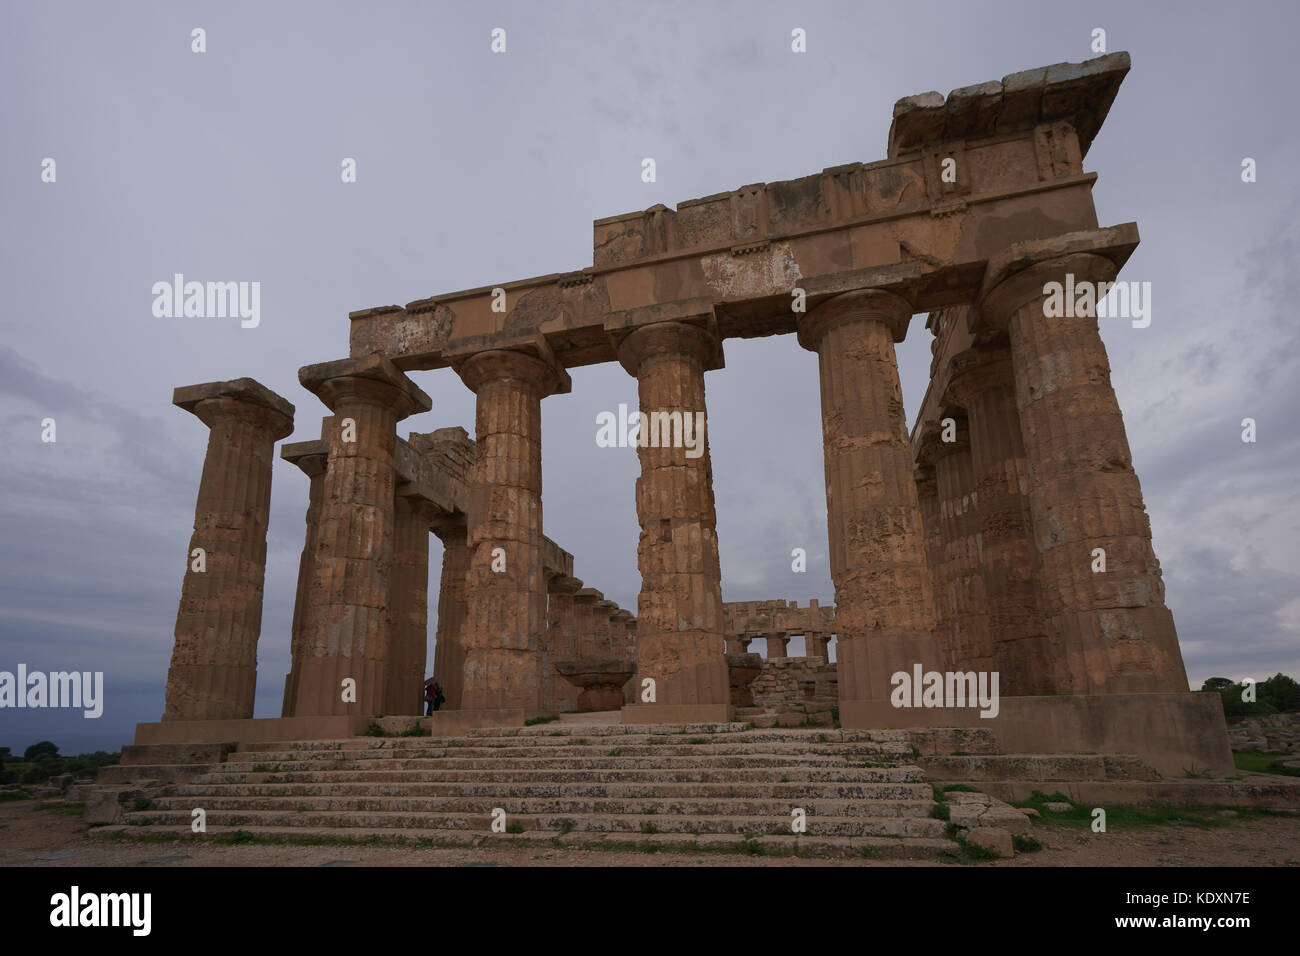 The Temple of Hera (also known as Temple E) at the Greek archeological site of Selinunte. From a series of travel photos in Sicily, Italy. Photo date: Stock Photo